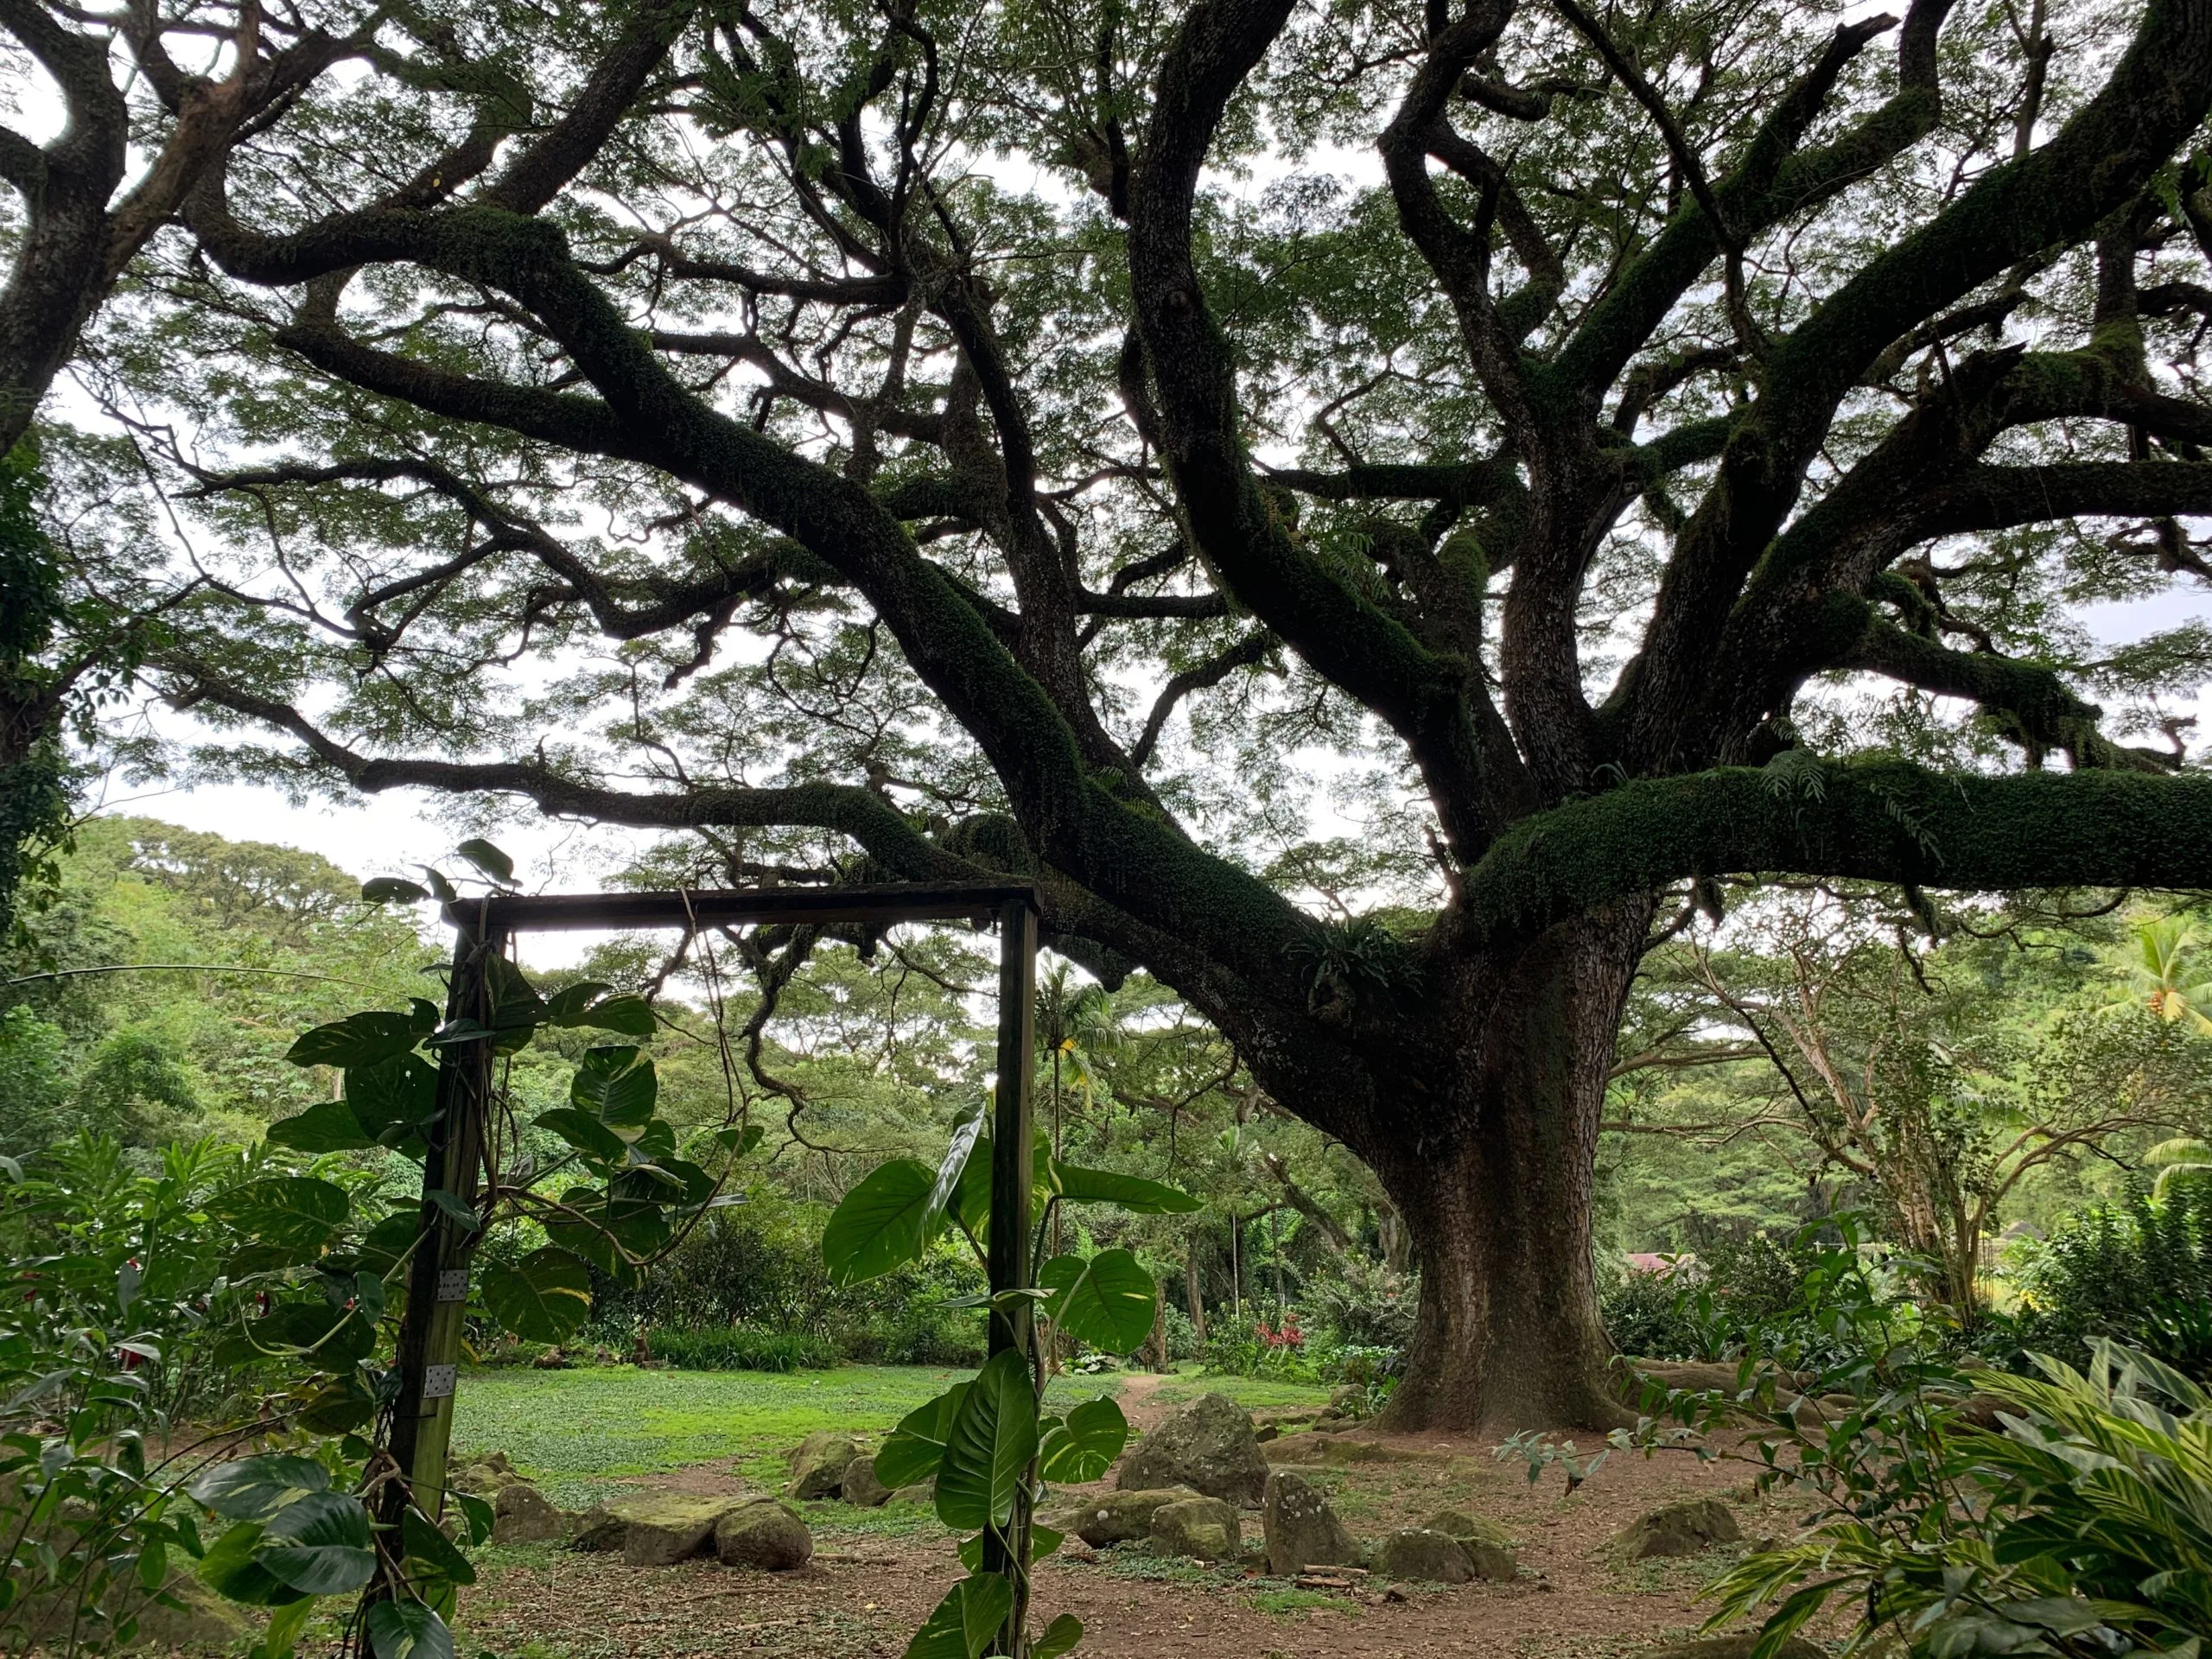 Another view of the mystical, twisted tree at Habitation Céron